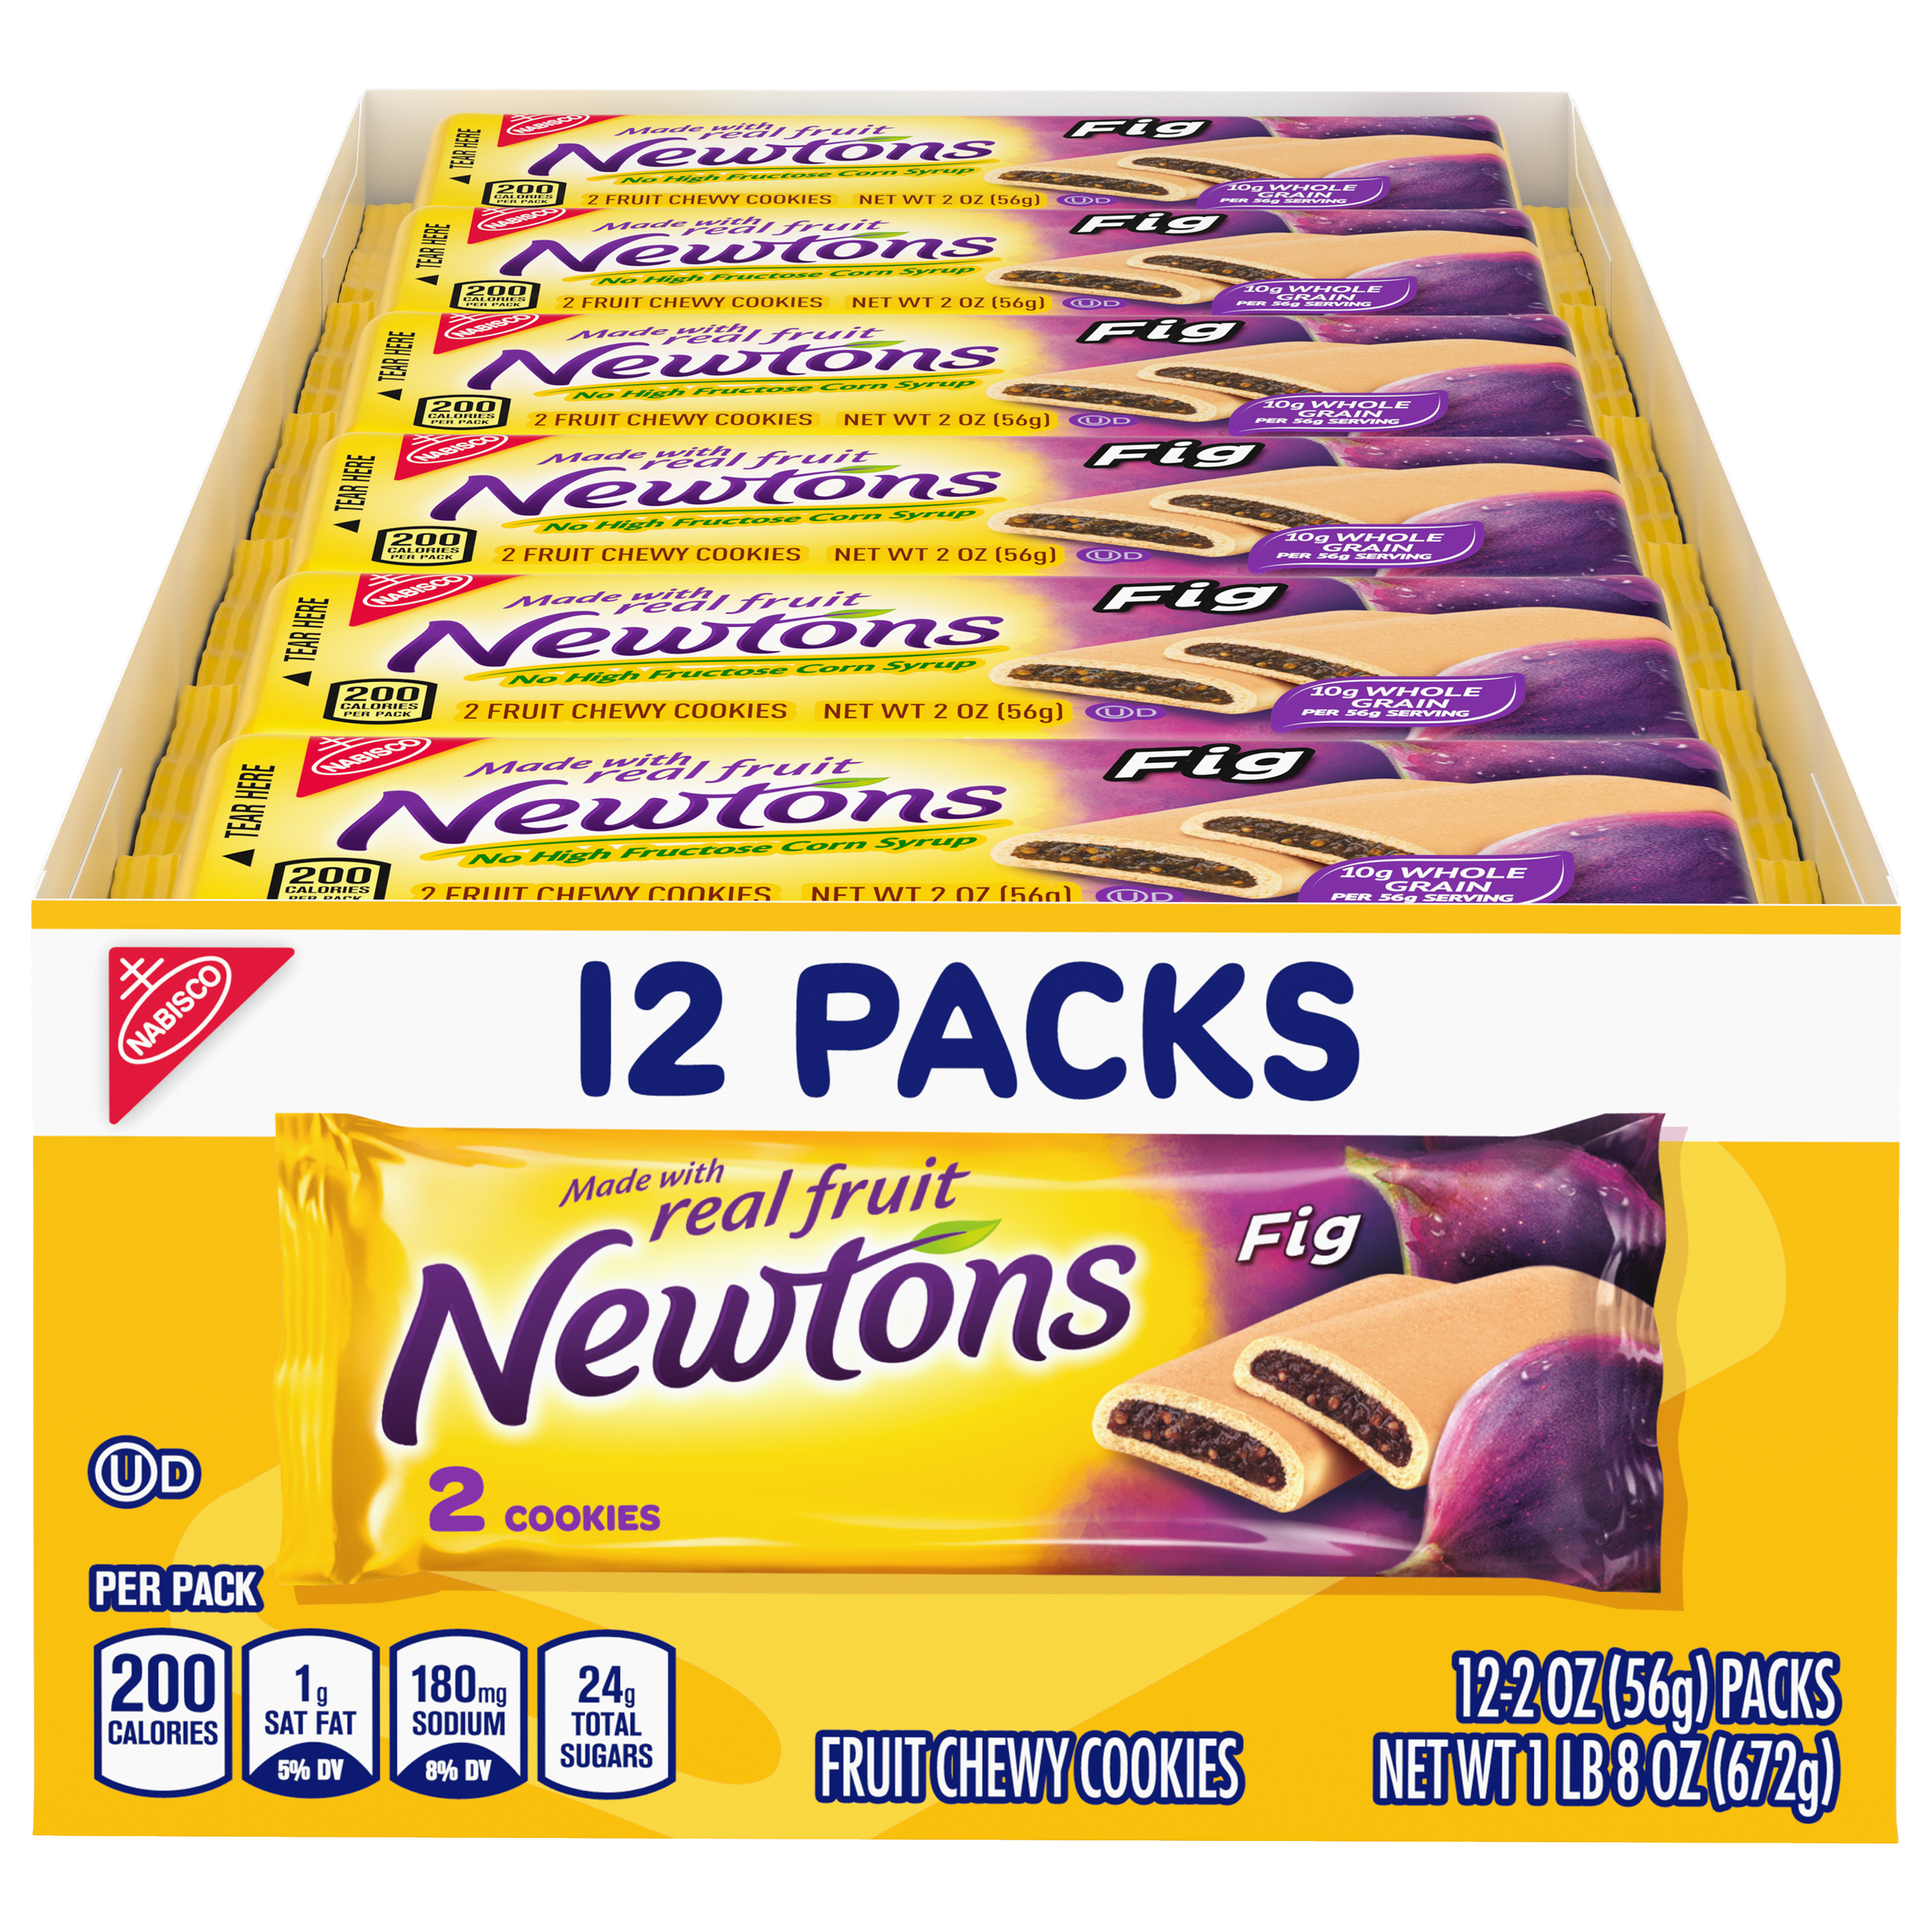 NEWTONS Fig Lunchbox Cookies 1.5 lb